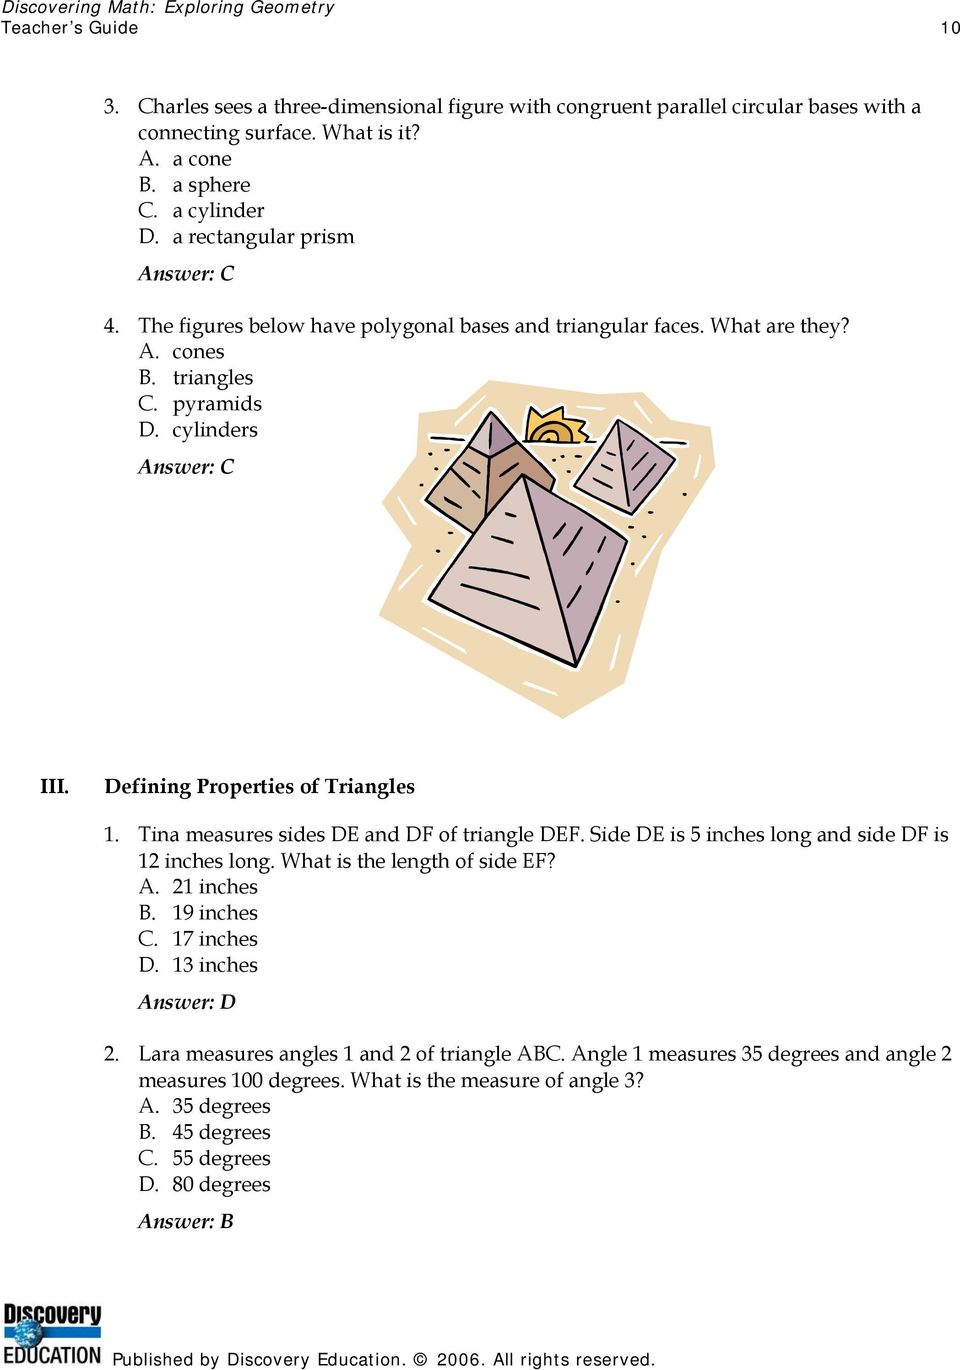 Defining Properties of Triangles 1. Tina measures sides DE and DF of triangle DEF. Side DE is 5 inches long and side DF is 12 inches long. What is the length of side EF? A. 21 inches B. 19 inches C.